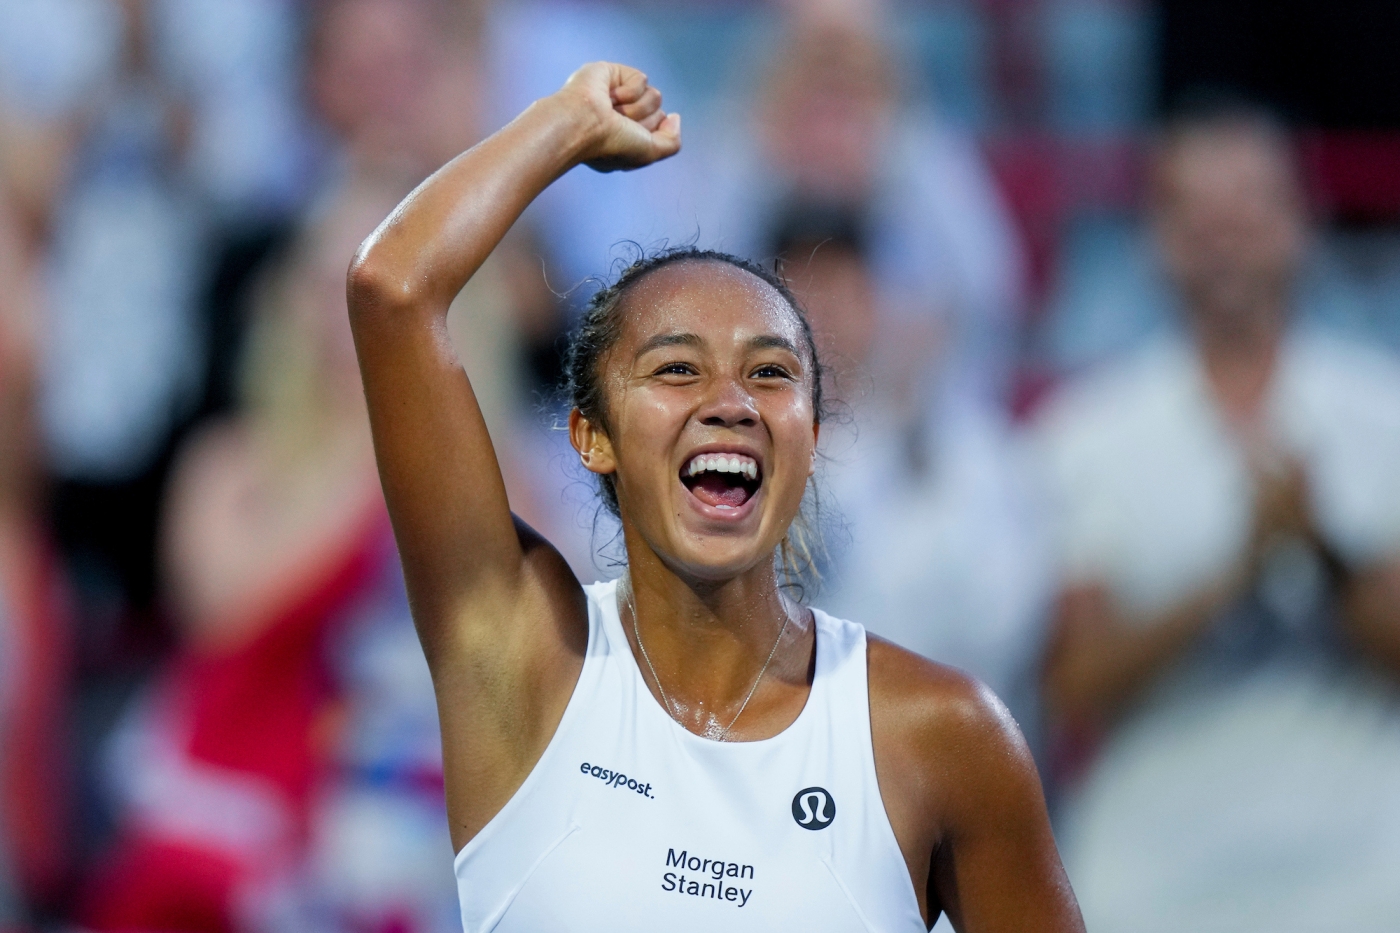 Fernandez lives up the crowd - WTA 1000 Montreal day 3 recap